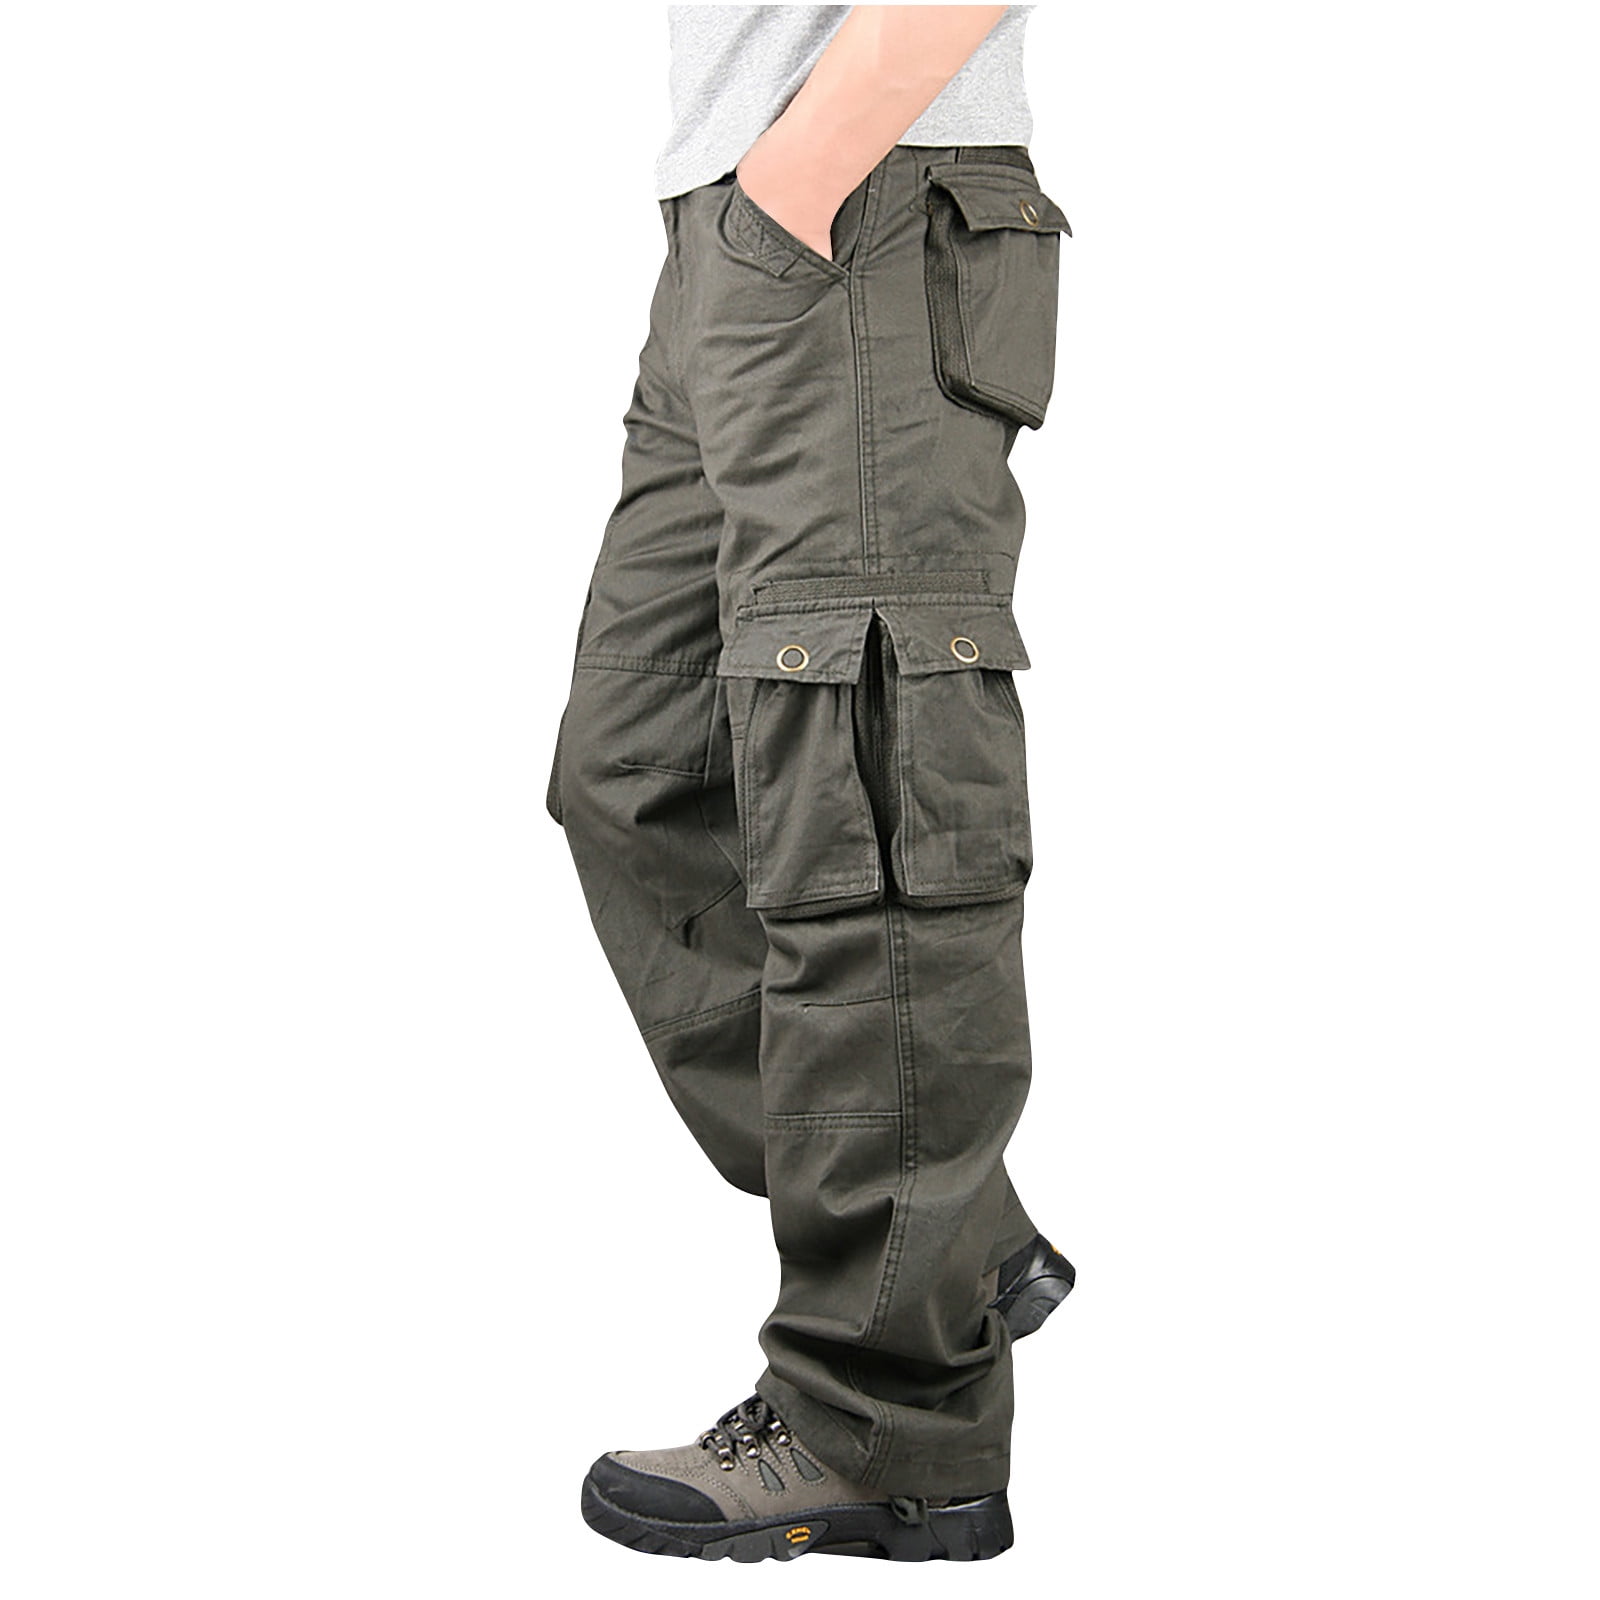 Guzom Work Pants for Women- Summer Casual With Pockets Slim Fit Mid-Waist  Short Sleeve Cargo Pants Gray Size L 